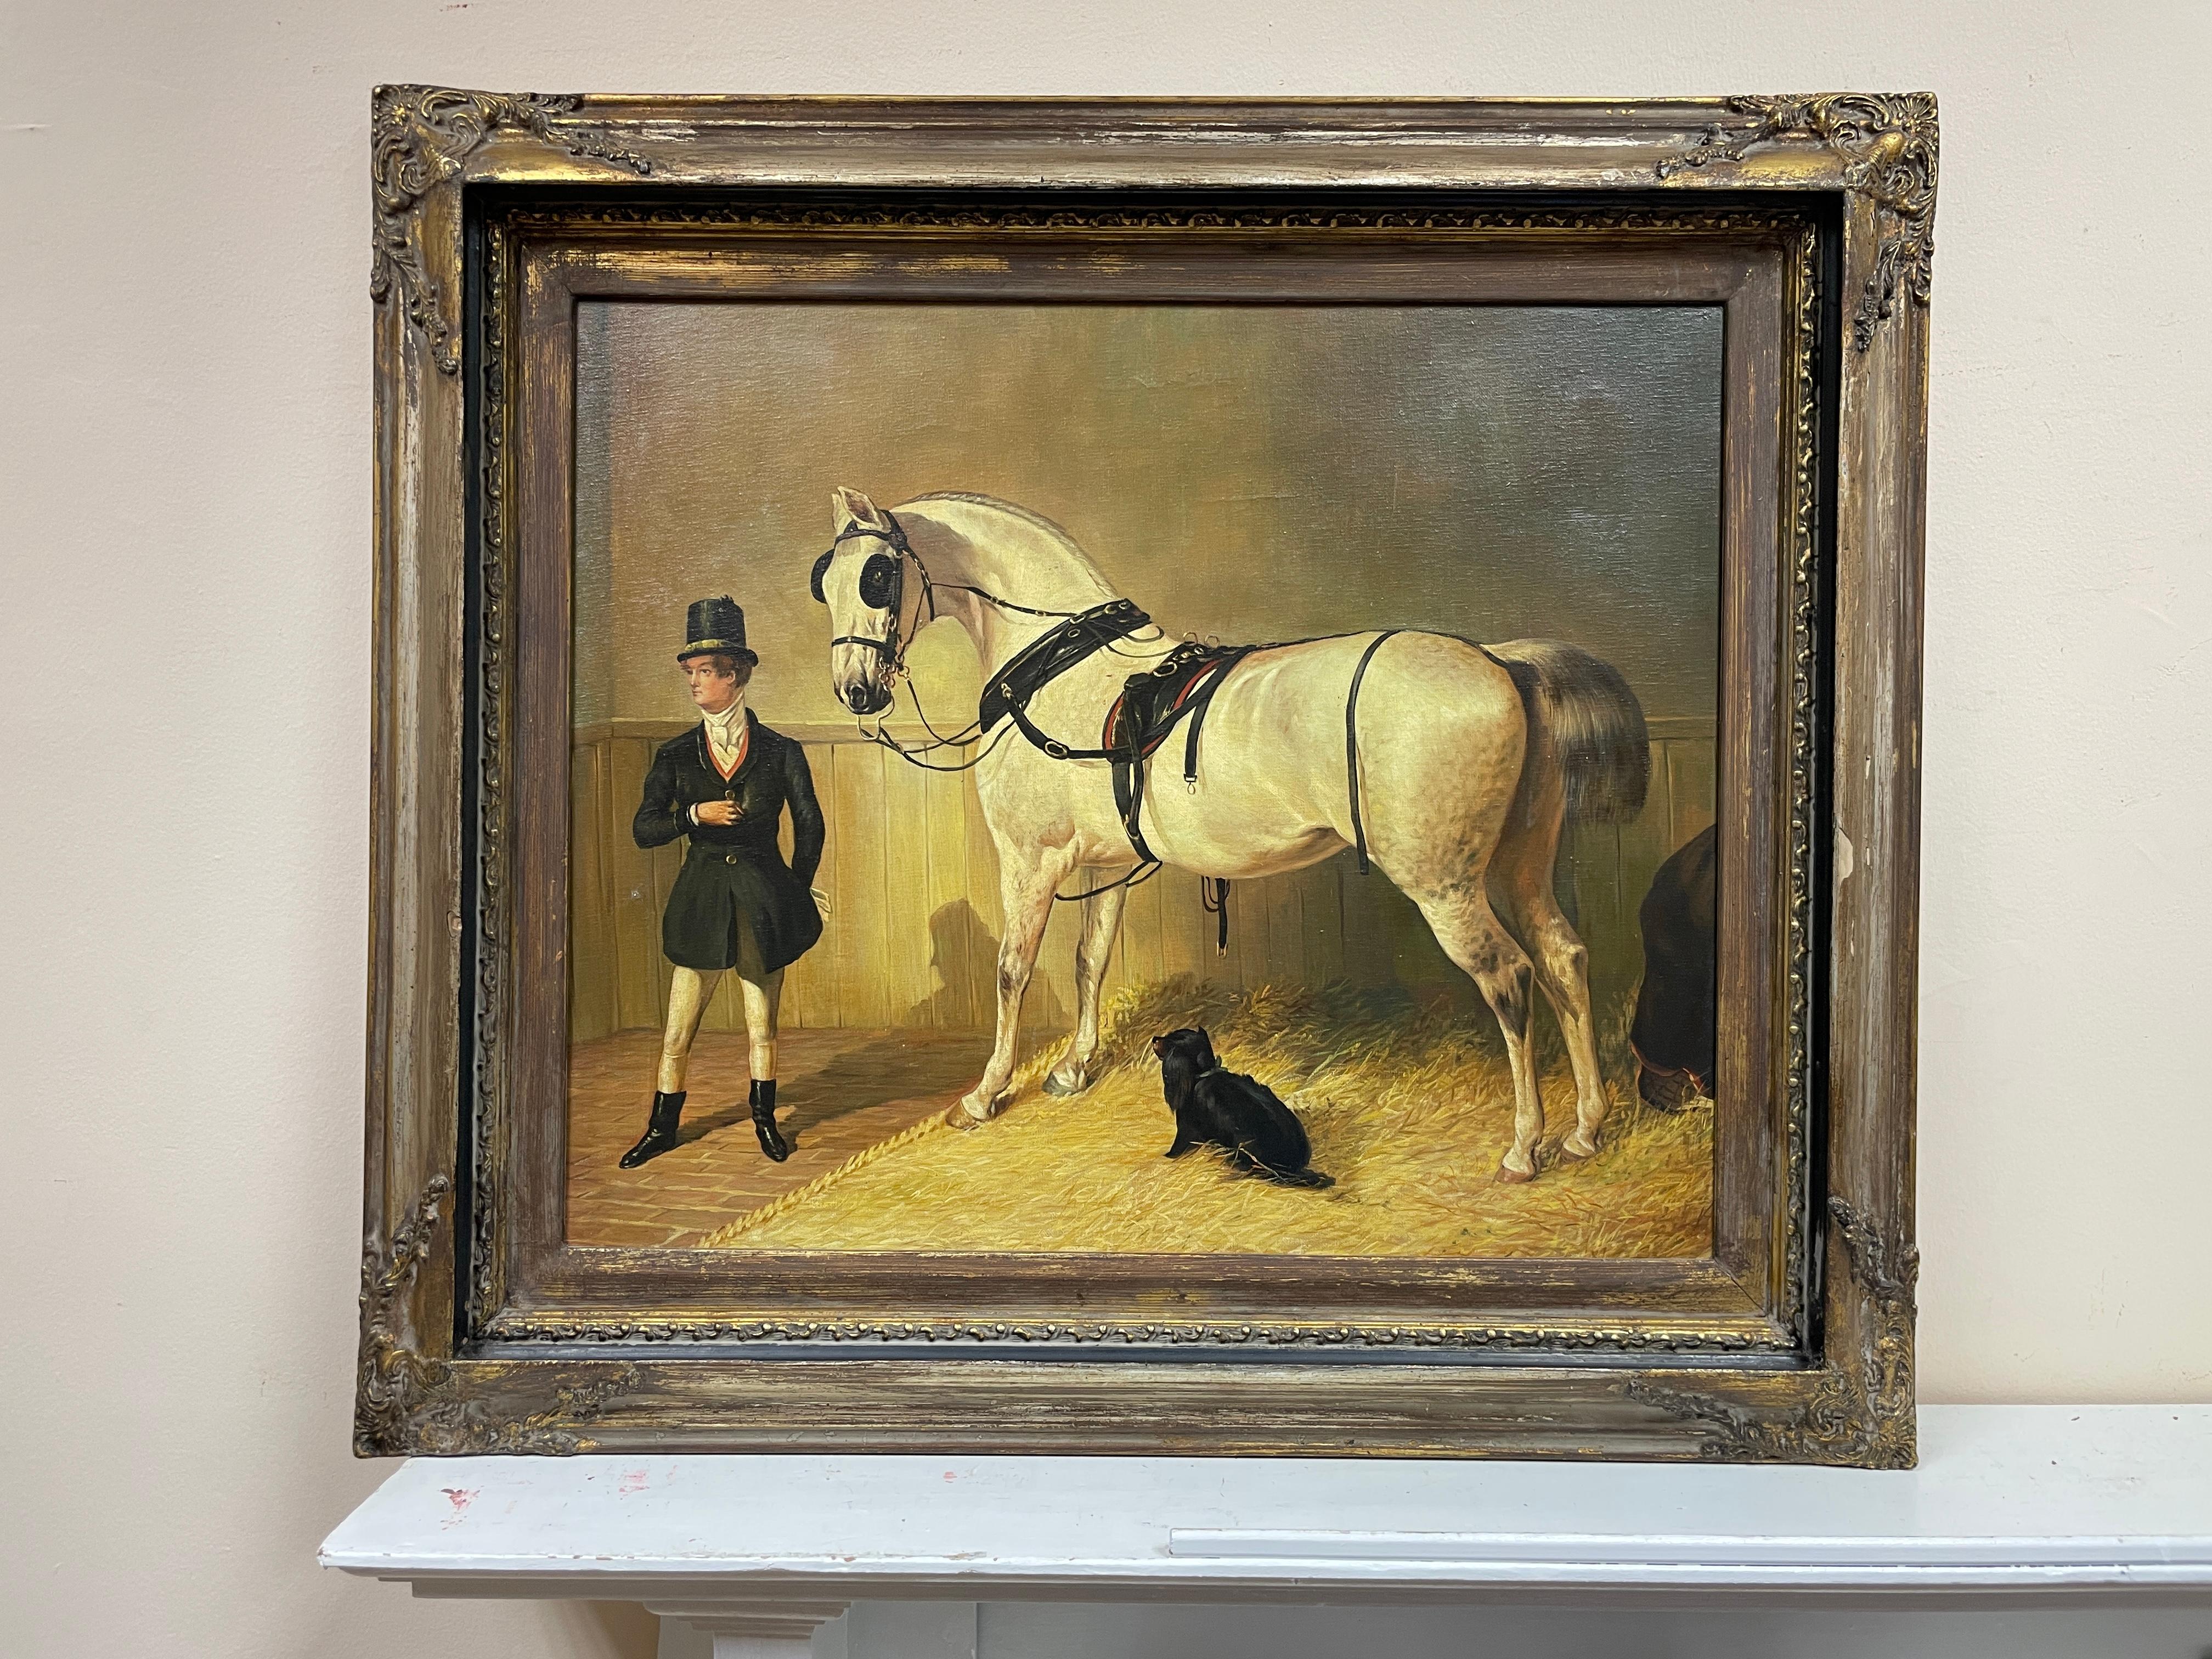 The Stable Interior
German School, mid 20th century
oil painting on canvas, framed
framed size: 28 x 32 inches
condition: overall very good and presentable
frame is given free of charge and we make no warranty as to its condition
provenance: from a